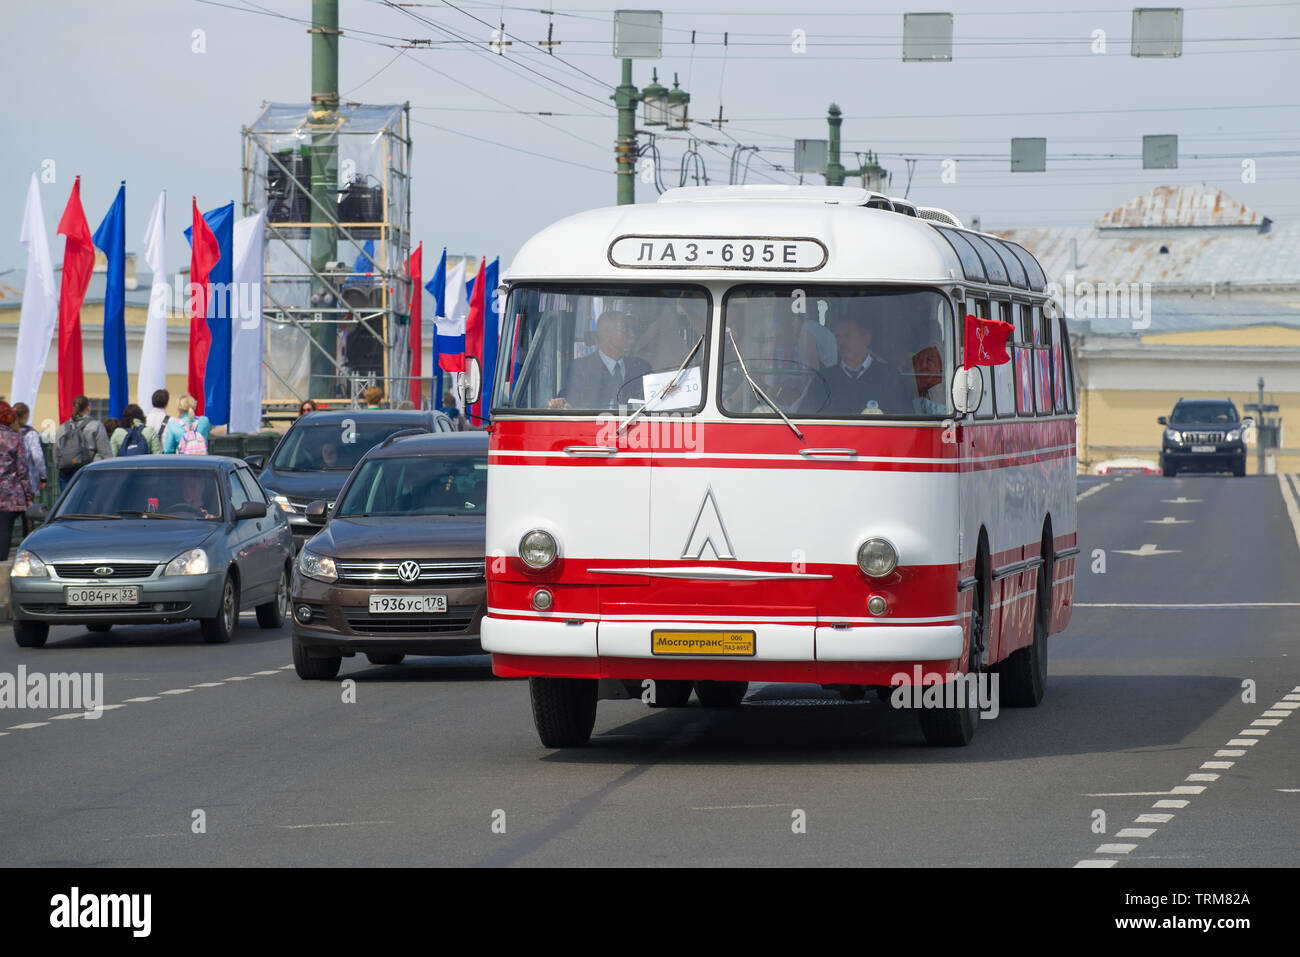 SAINT-PETERSBURG, RUSSIA - MAY 25, 2019: Bus LAZ-695E on the Palace Bridge. The participant of the parade of retrotransport in honor of the City Day Stock Photo